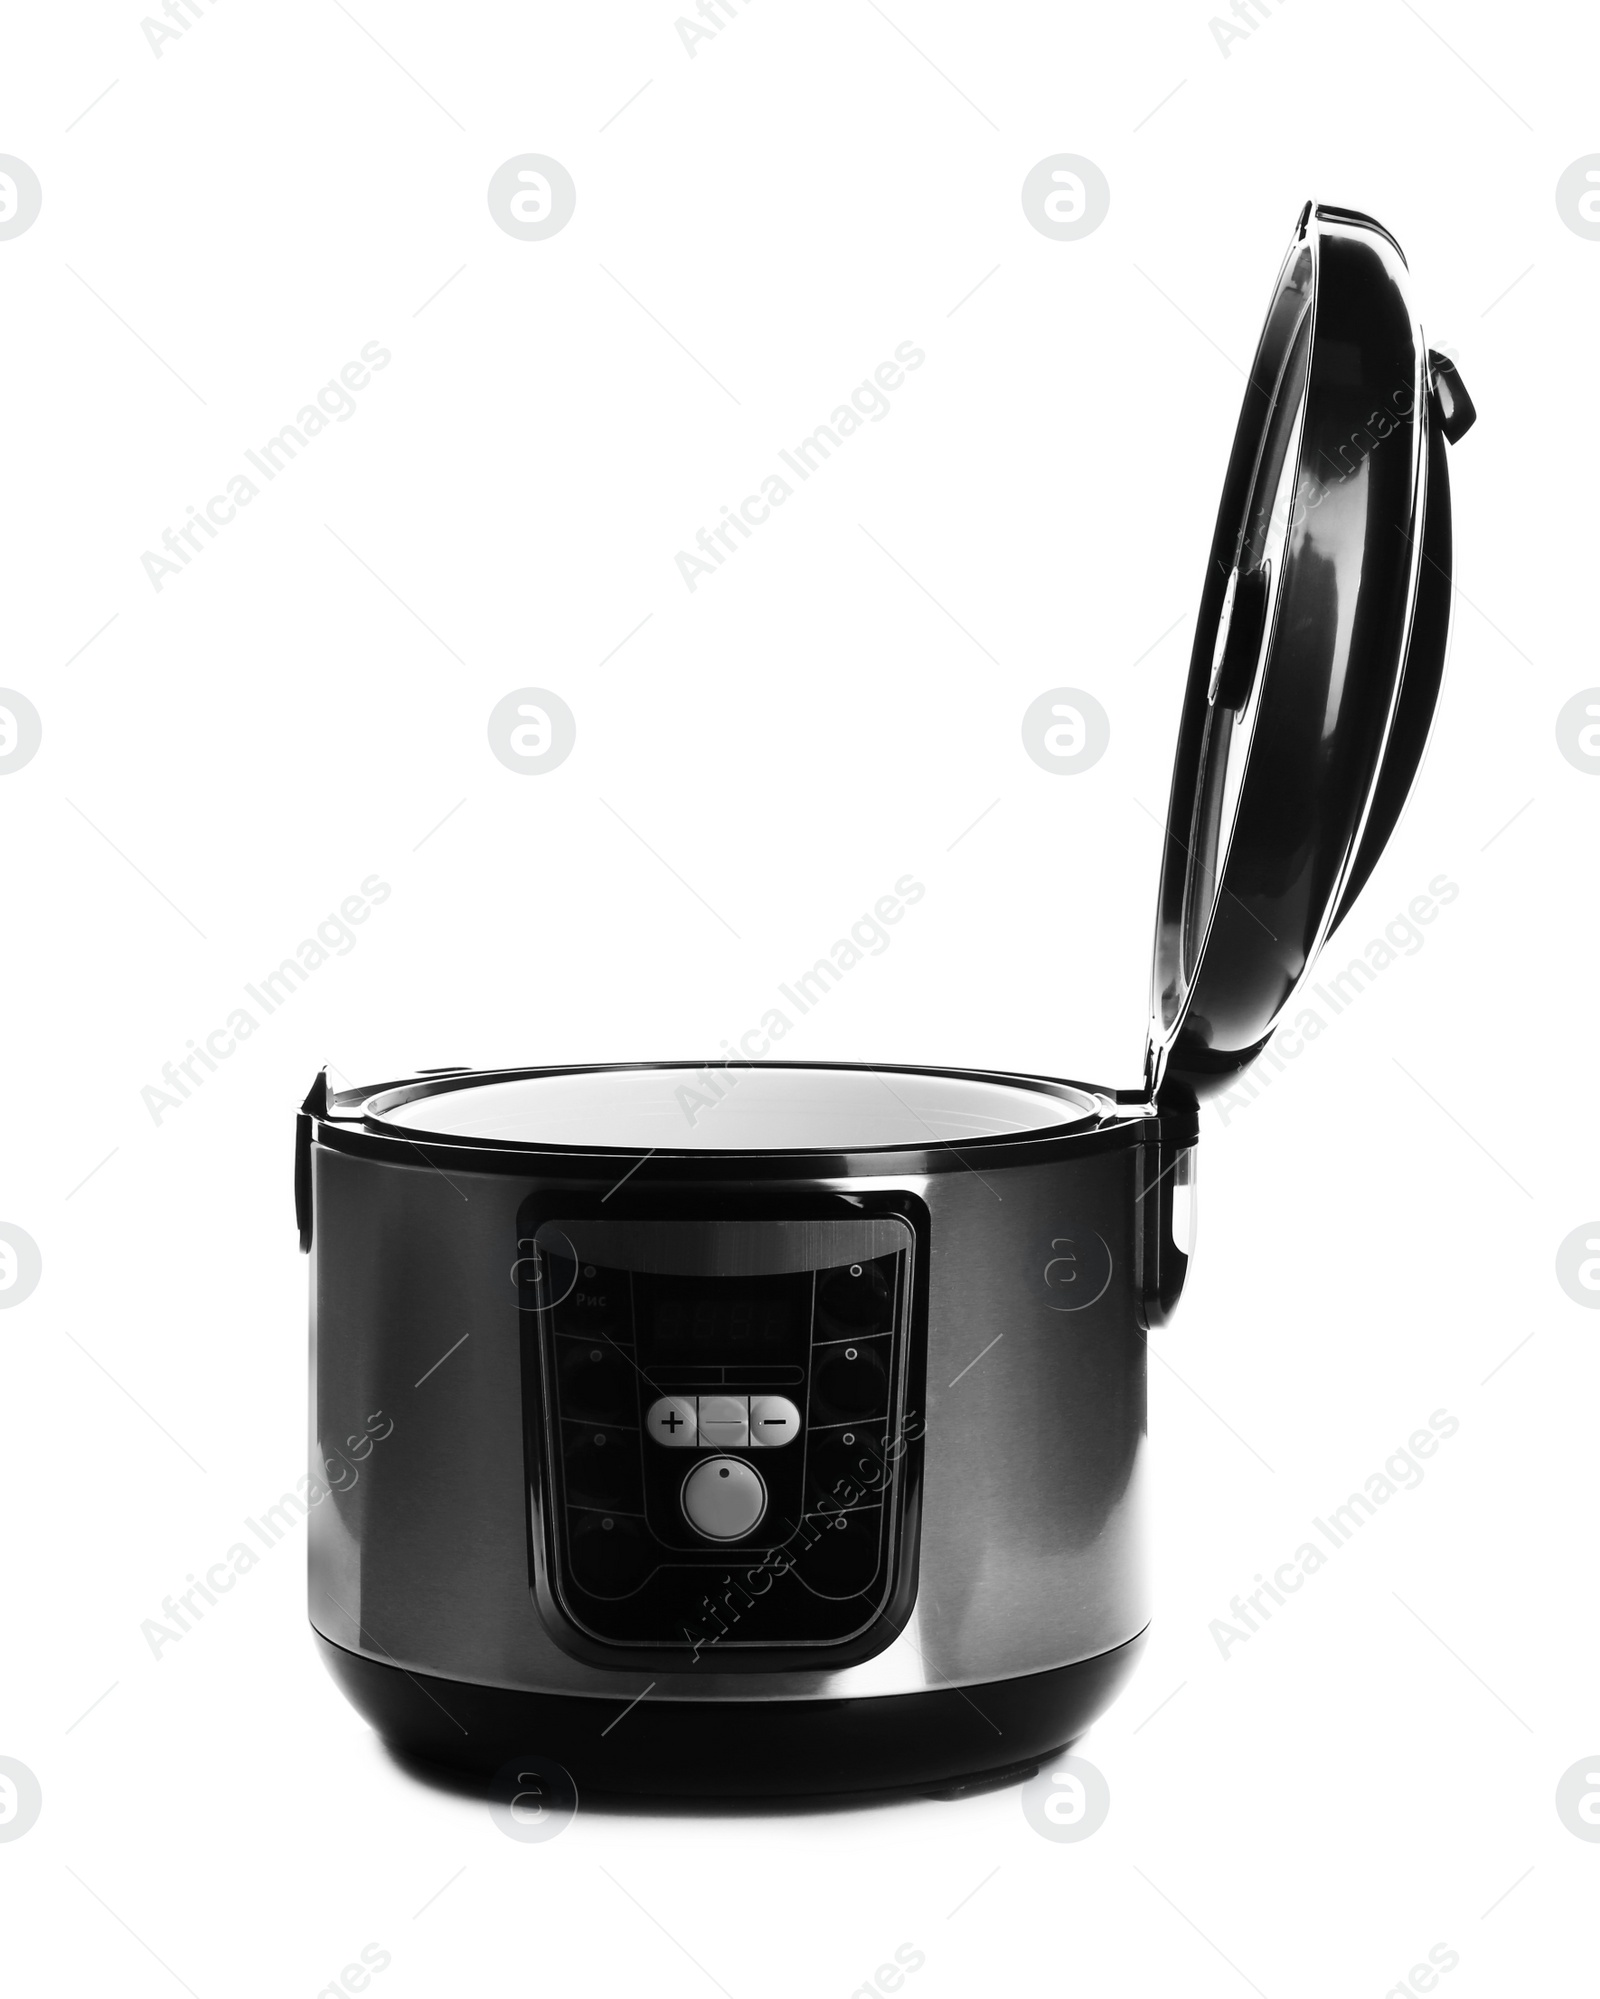 Photo of New modern multi cooker on white background